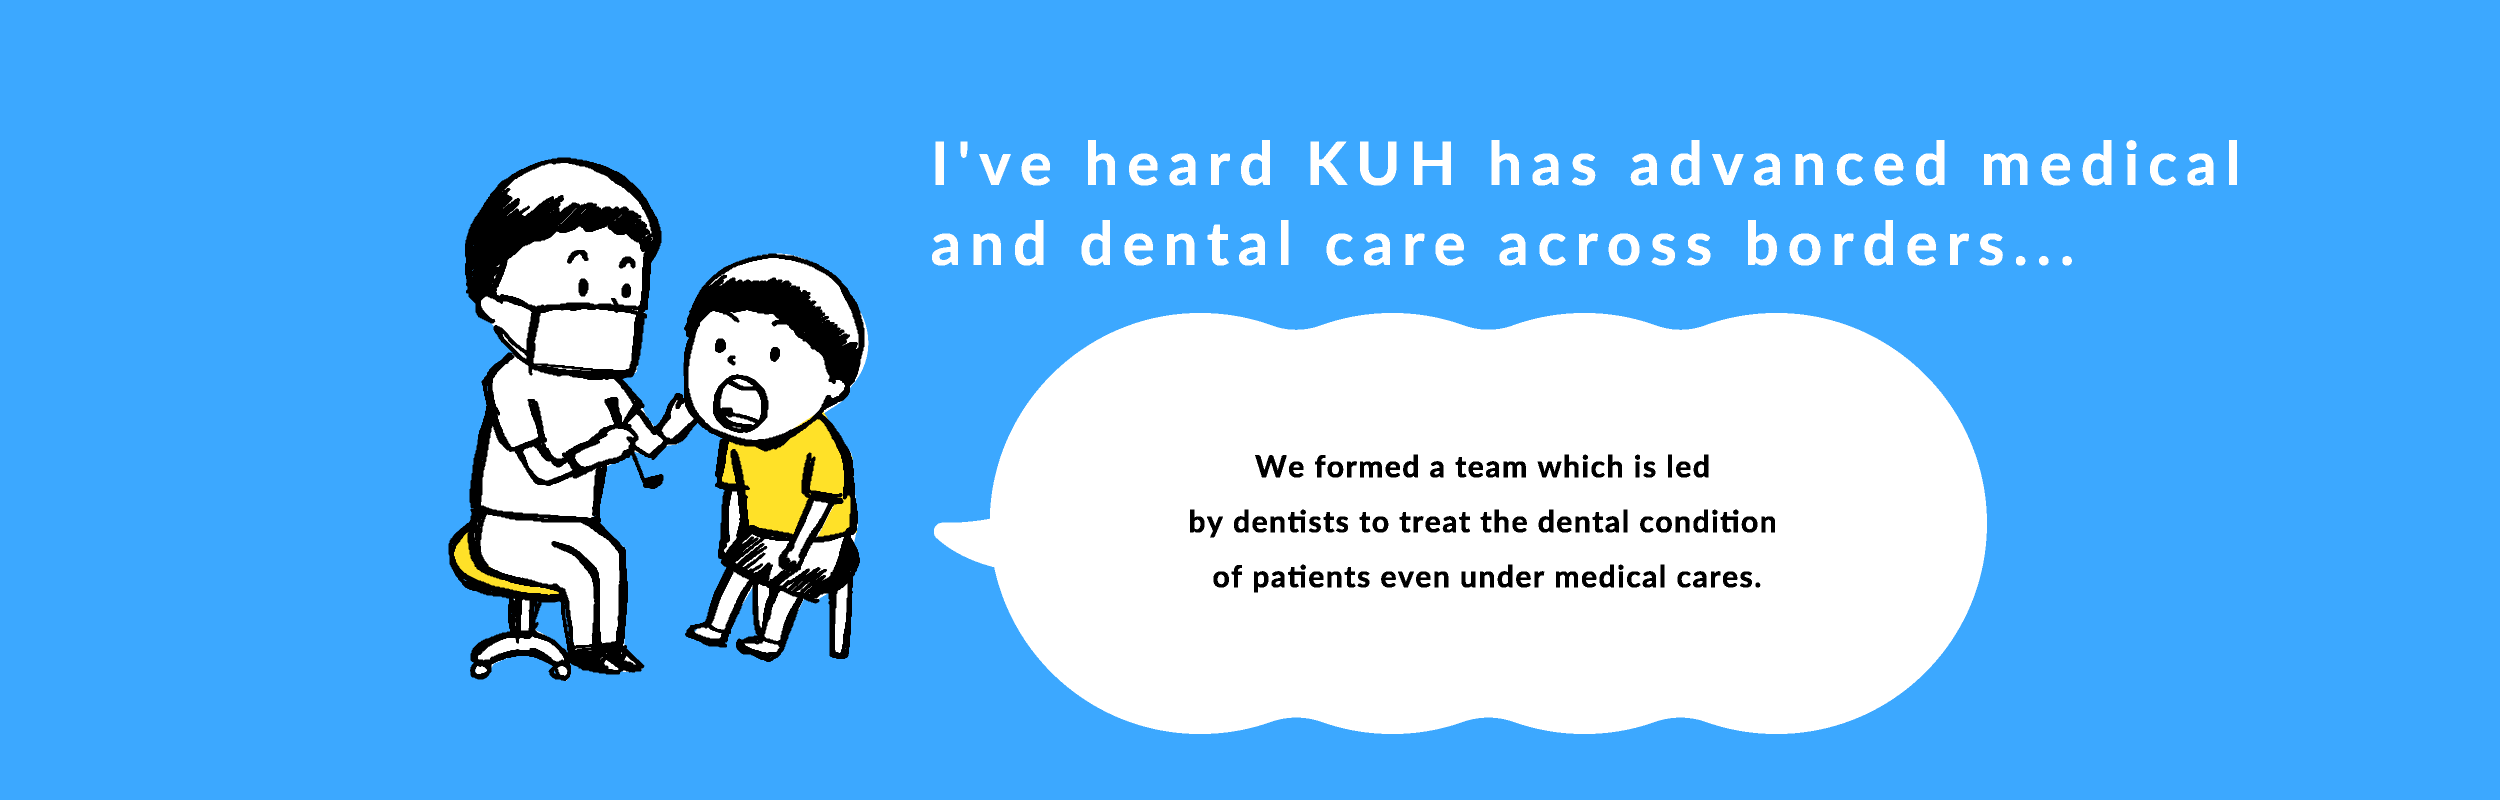 We formed a team which is led by dentists to treat the dental condition of patients even under medical cares.